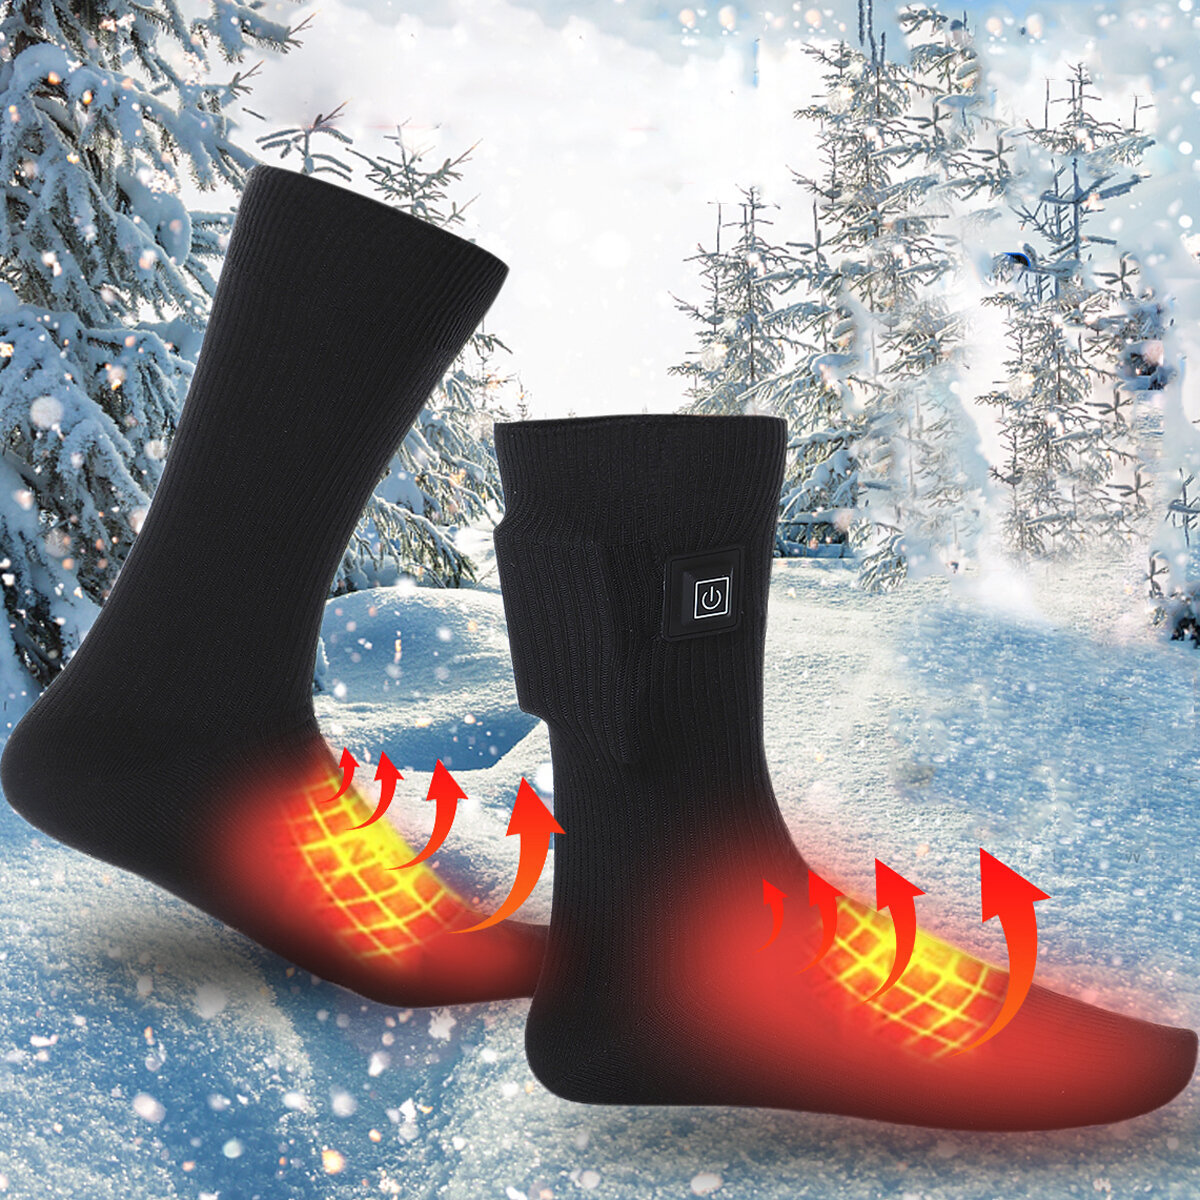 

1 Pair 3V Electric Heated Socks USB Rechargeable Feet Warmer Outdoor Winter Sport Cycling Hiking Skiing Socks